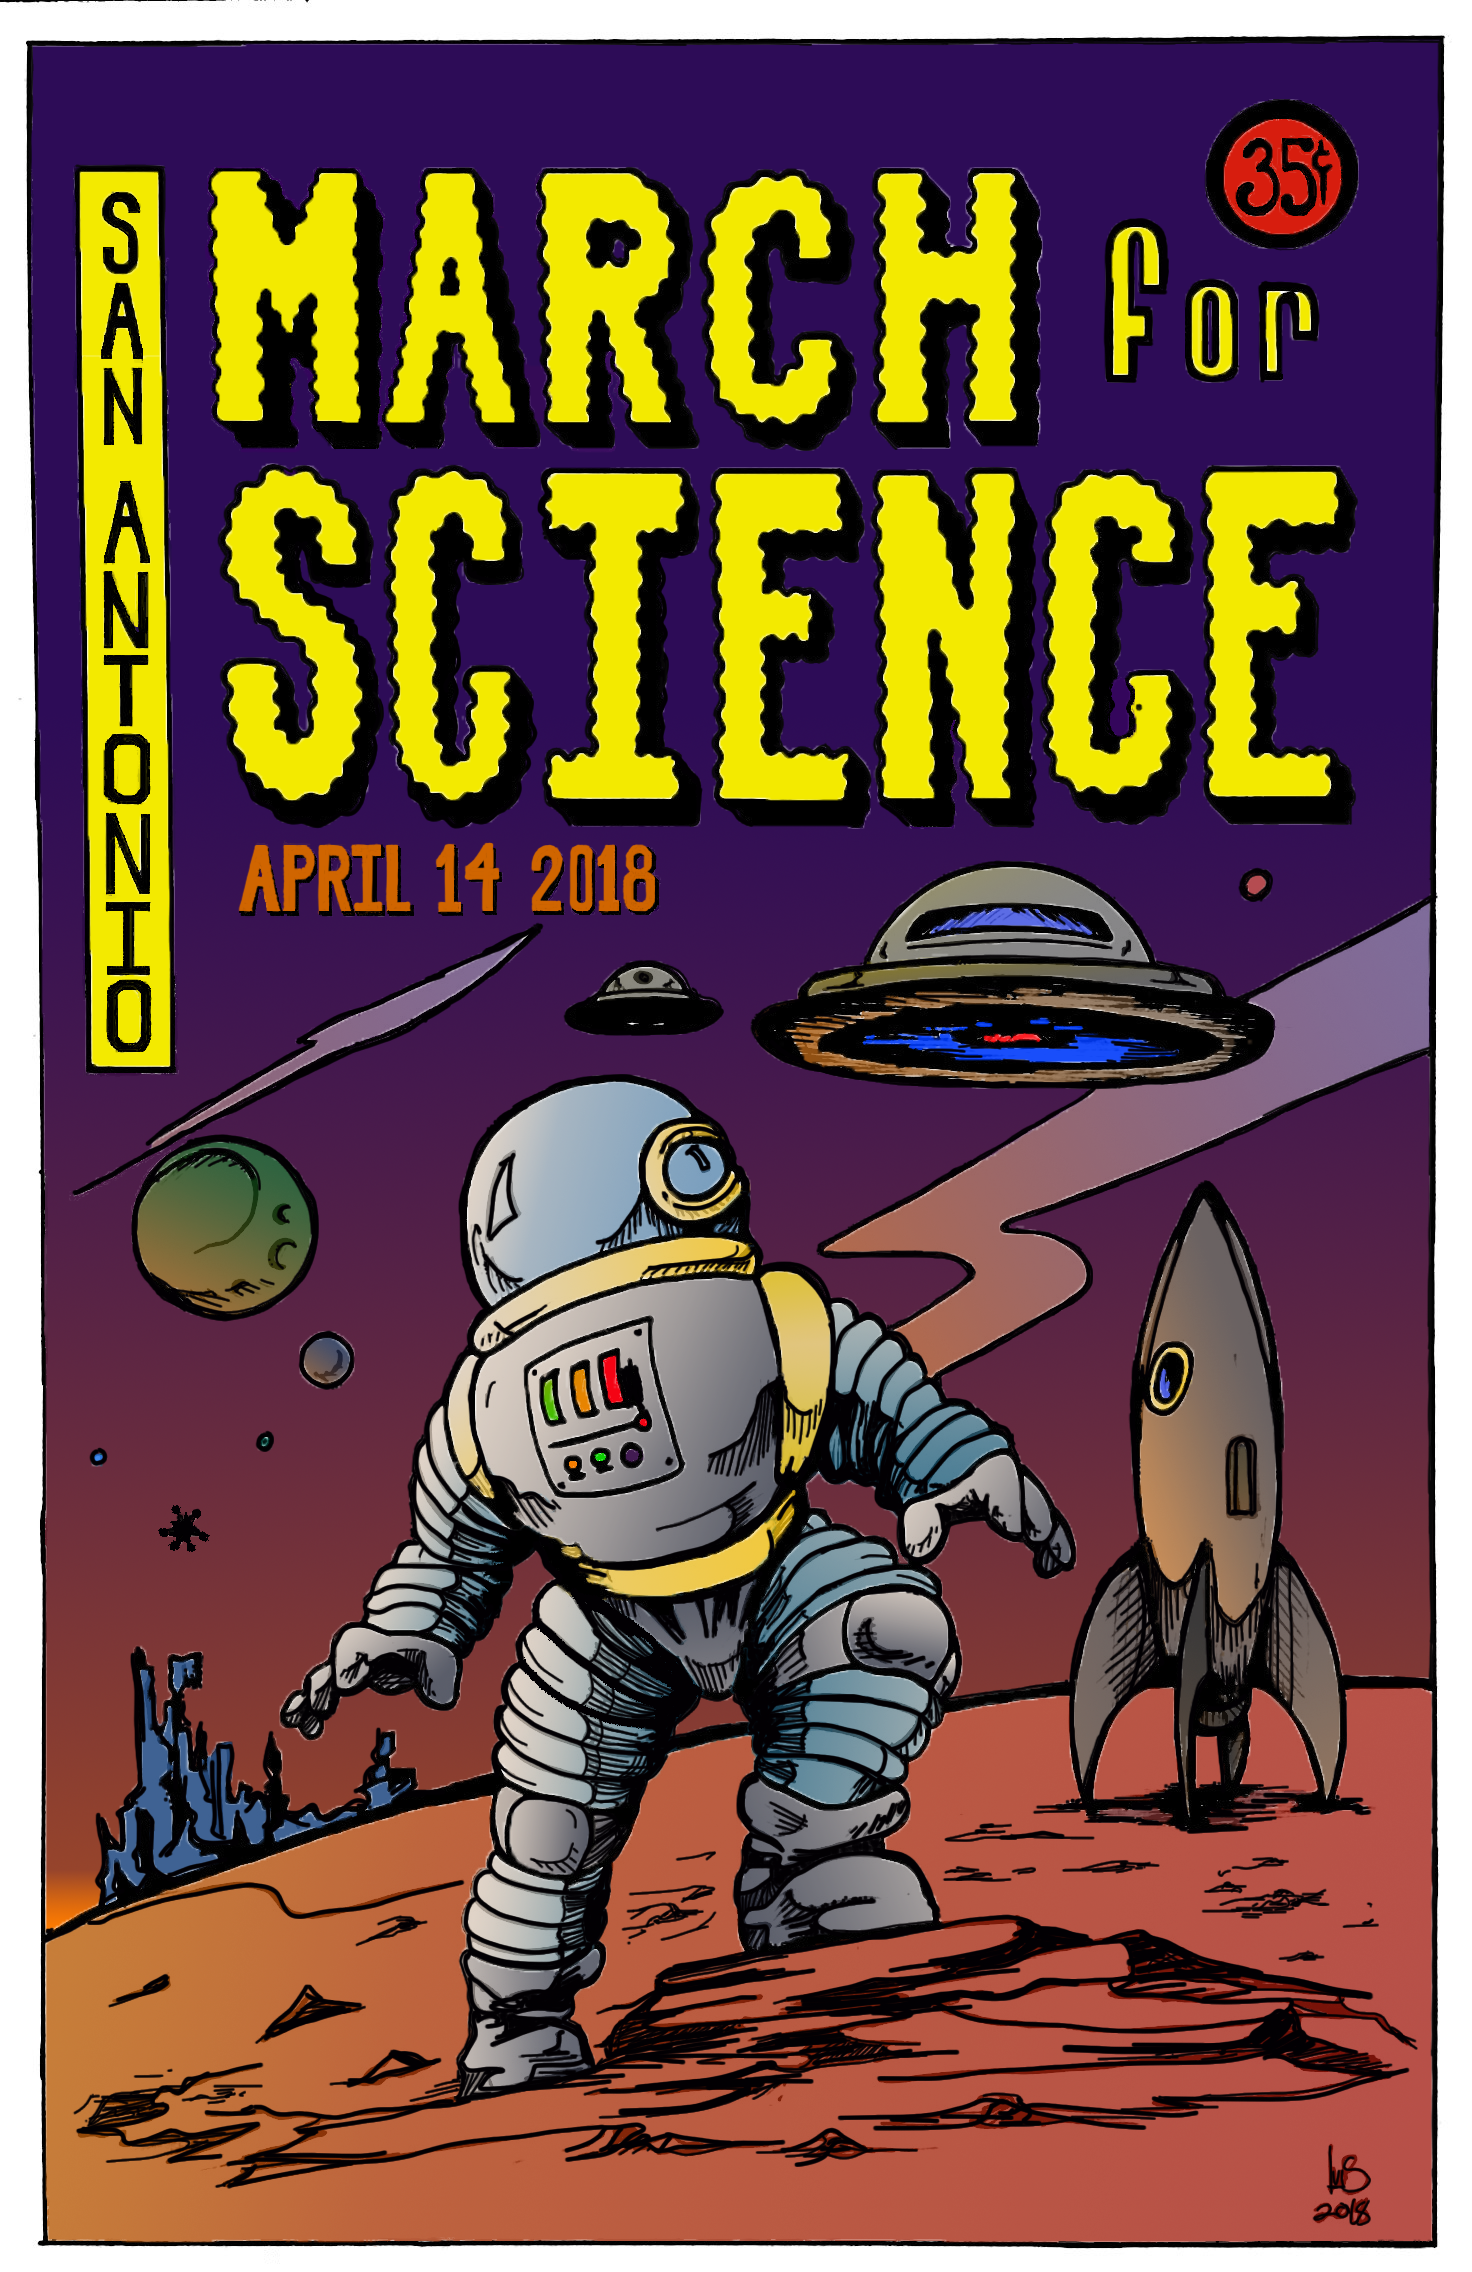 2018 March for Science